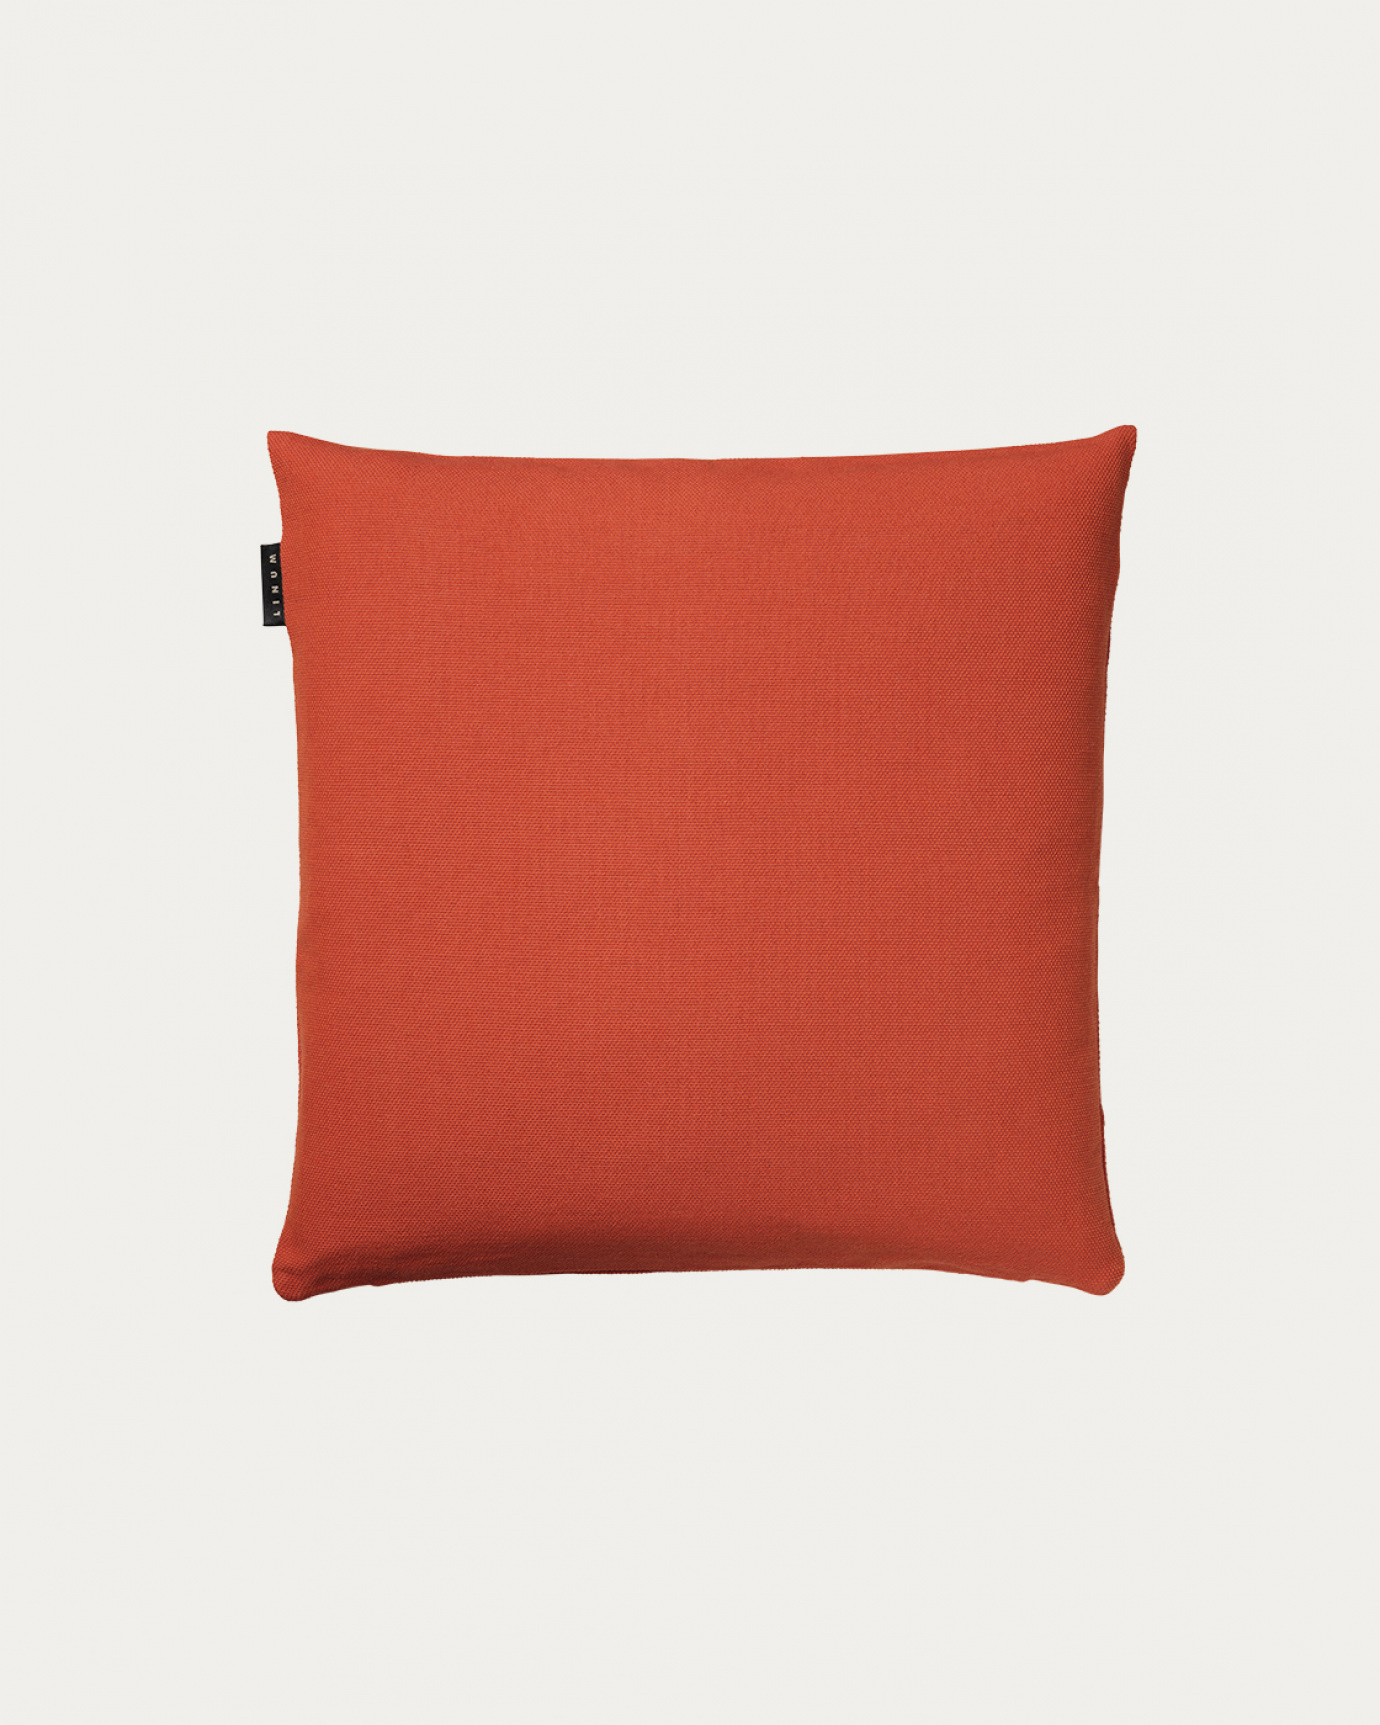 Product image rusty orange PEPPER cushion cover made of soft cotton from LINUM DESIGN. Easy to wash and durable for generations. Size 40x40 cm.